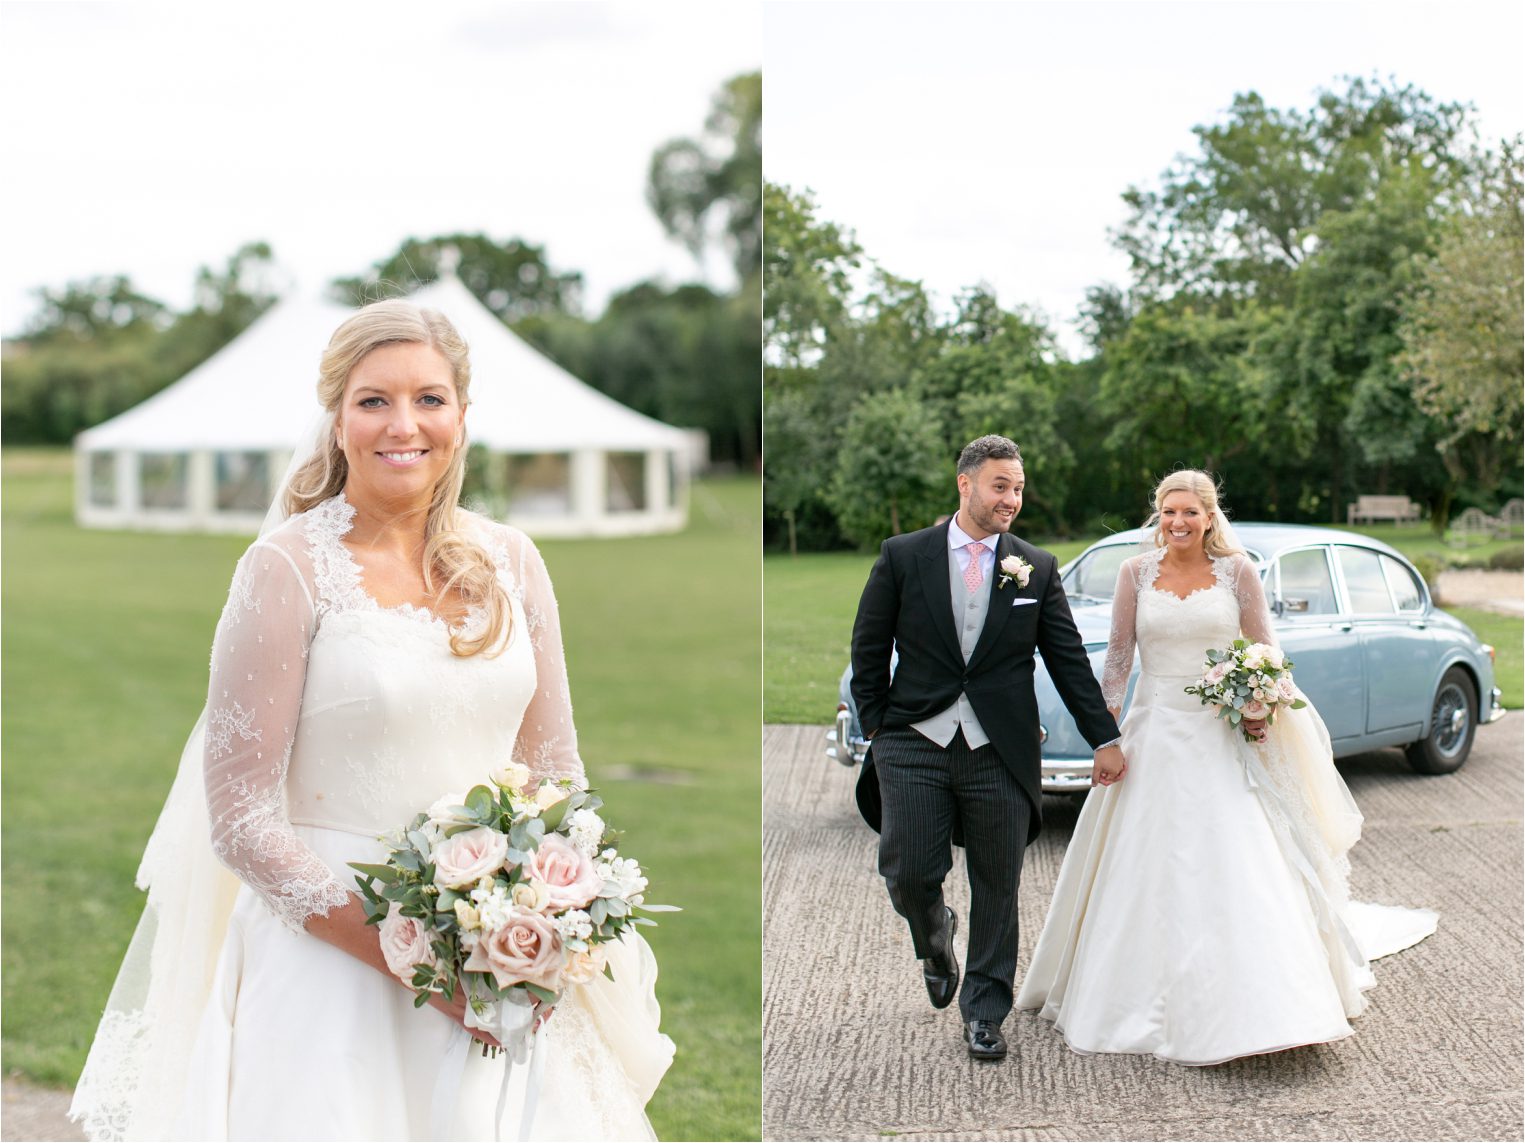 Relaxed wedding photography in Somerset